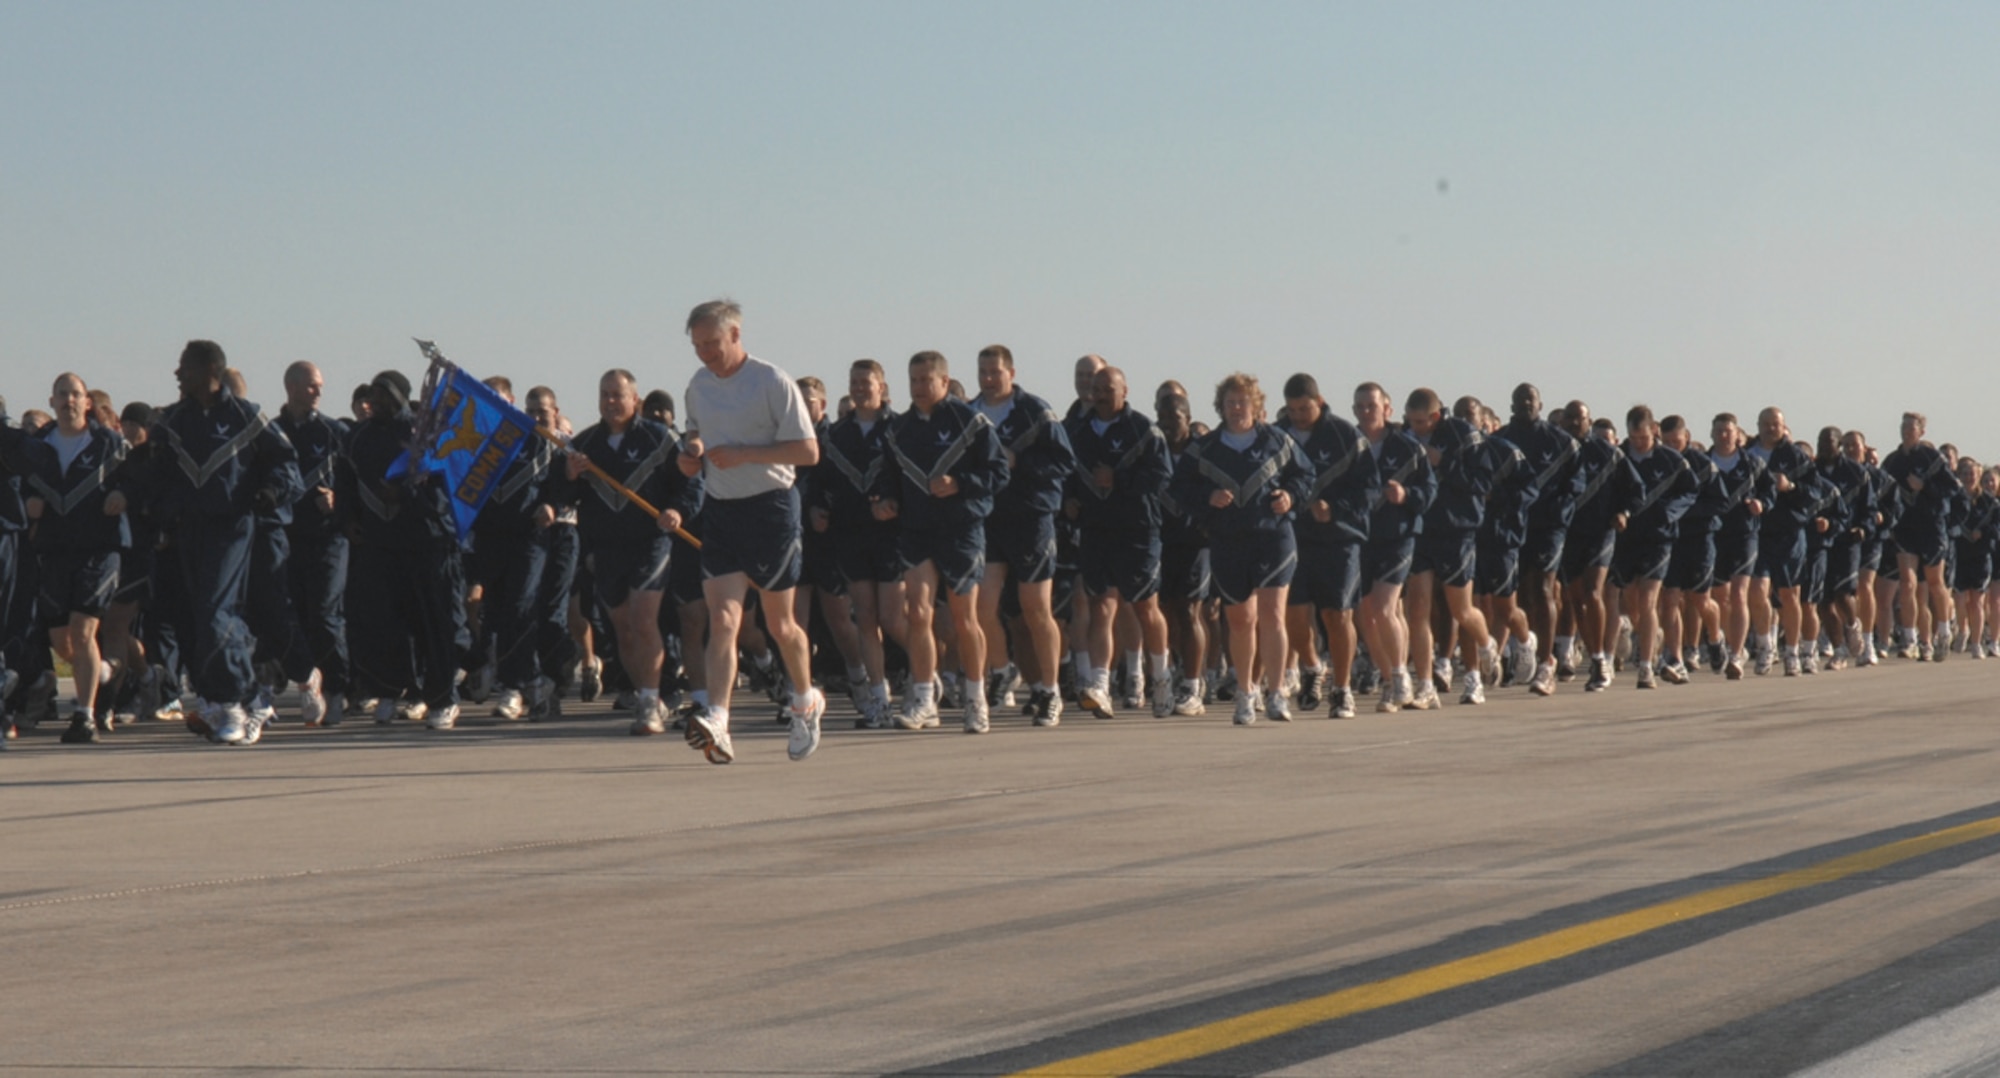 SPANGDAHLEM AIR BASE, GERMANY -- Chief Master Sgt. Vance Clarke, 52nd Fighter Wing command chief, runs alongside Airmen from the 52nd Communications Squadron during the wing fun run on the Spangdahlem Air Base flight line May 1. (US Air Force photo/Senior Airman Josie Kemp)